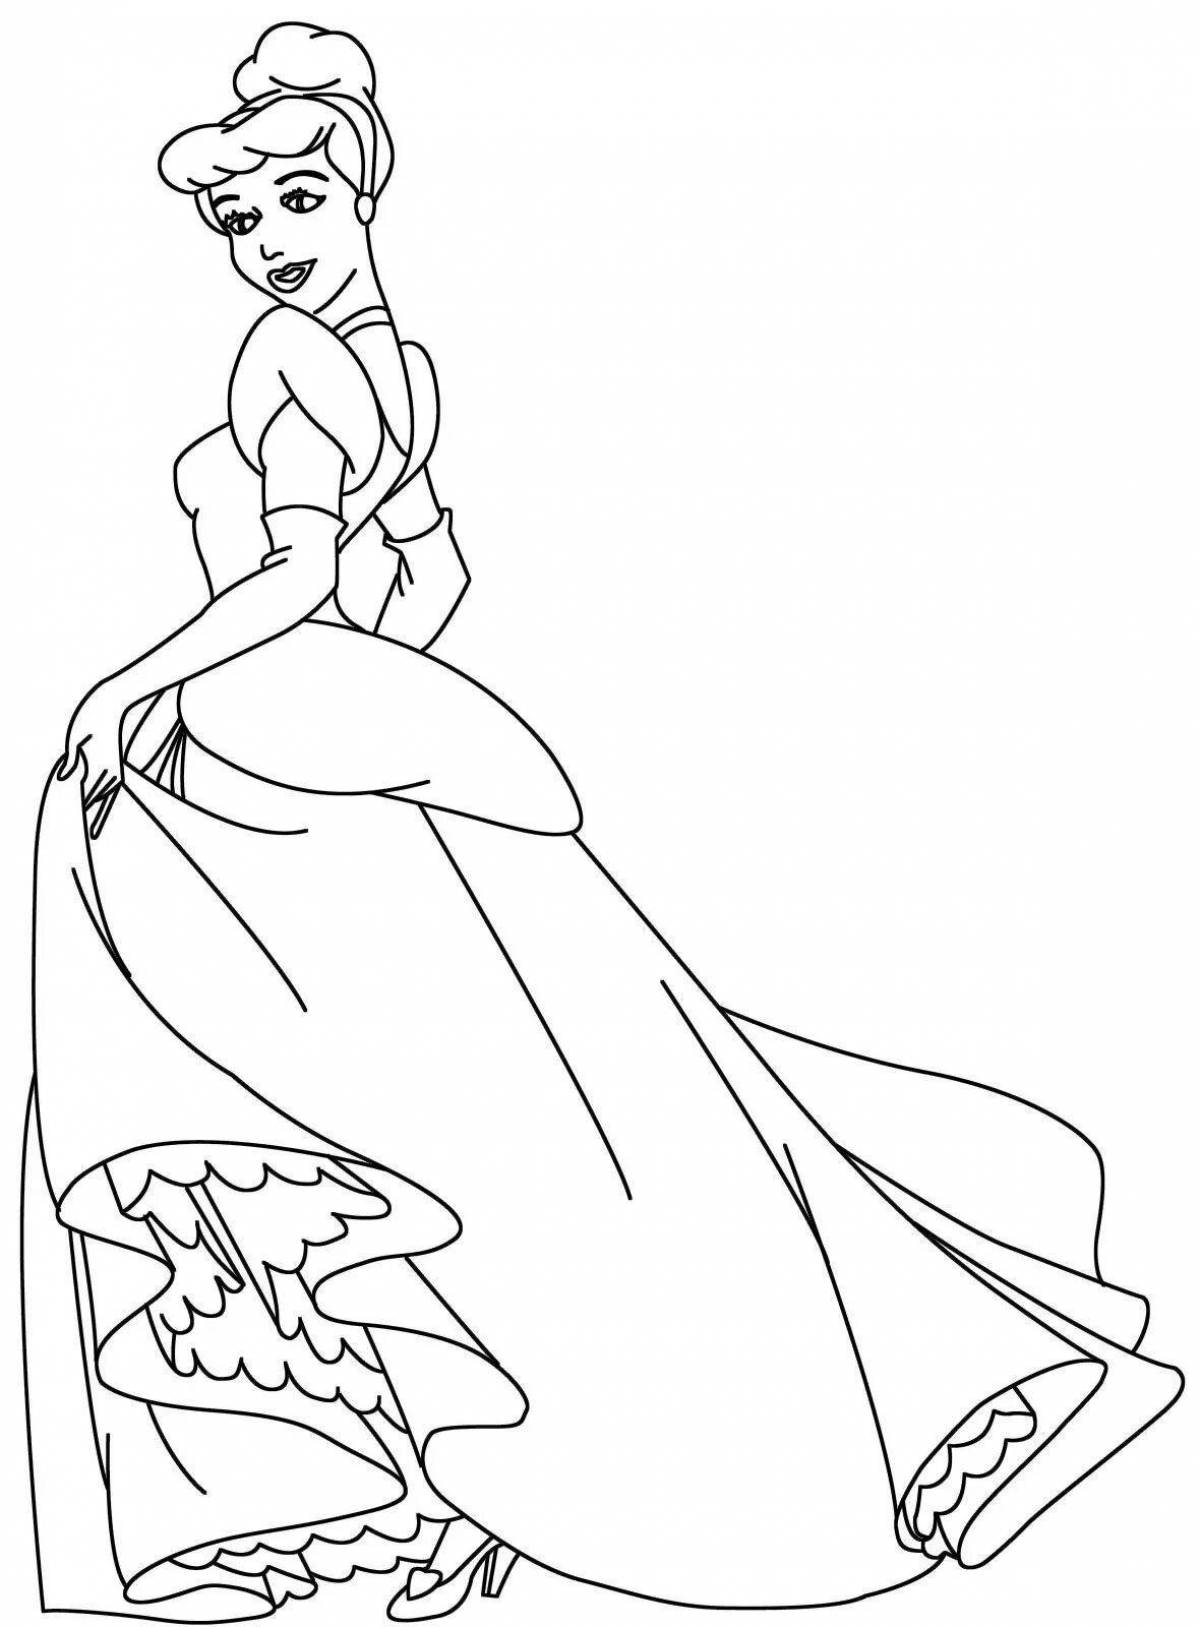 Coloring book shining Cinderella for kids